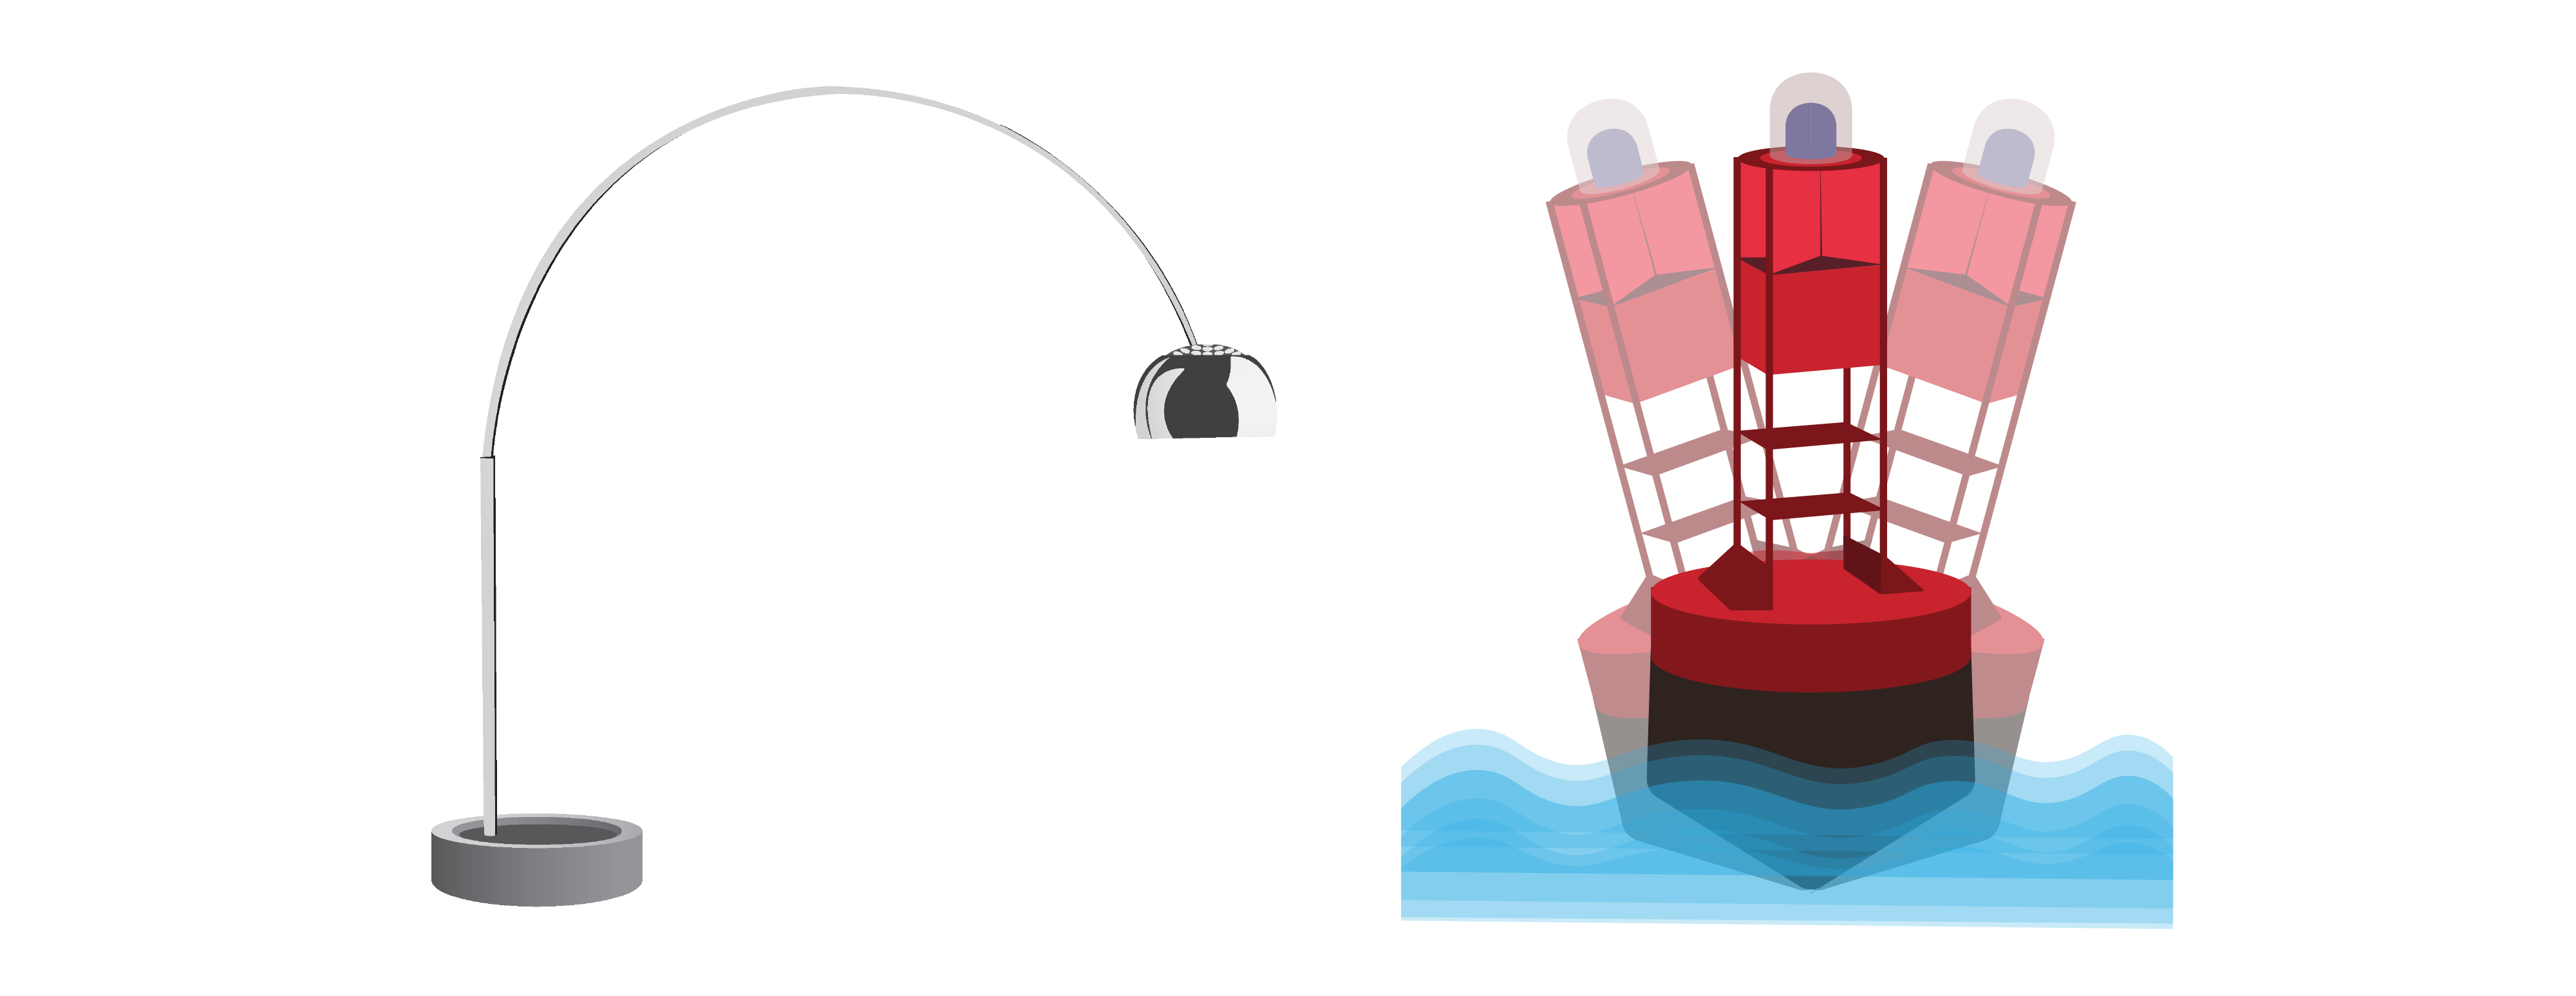 On the left, a tall silver floor lamp with a long, curved light. On the right, a red buoy floats in the water.